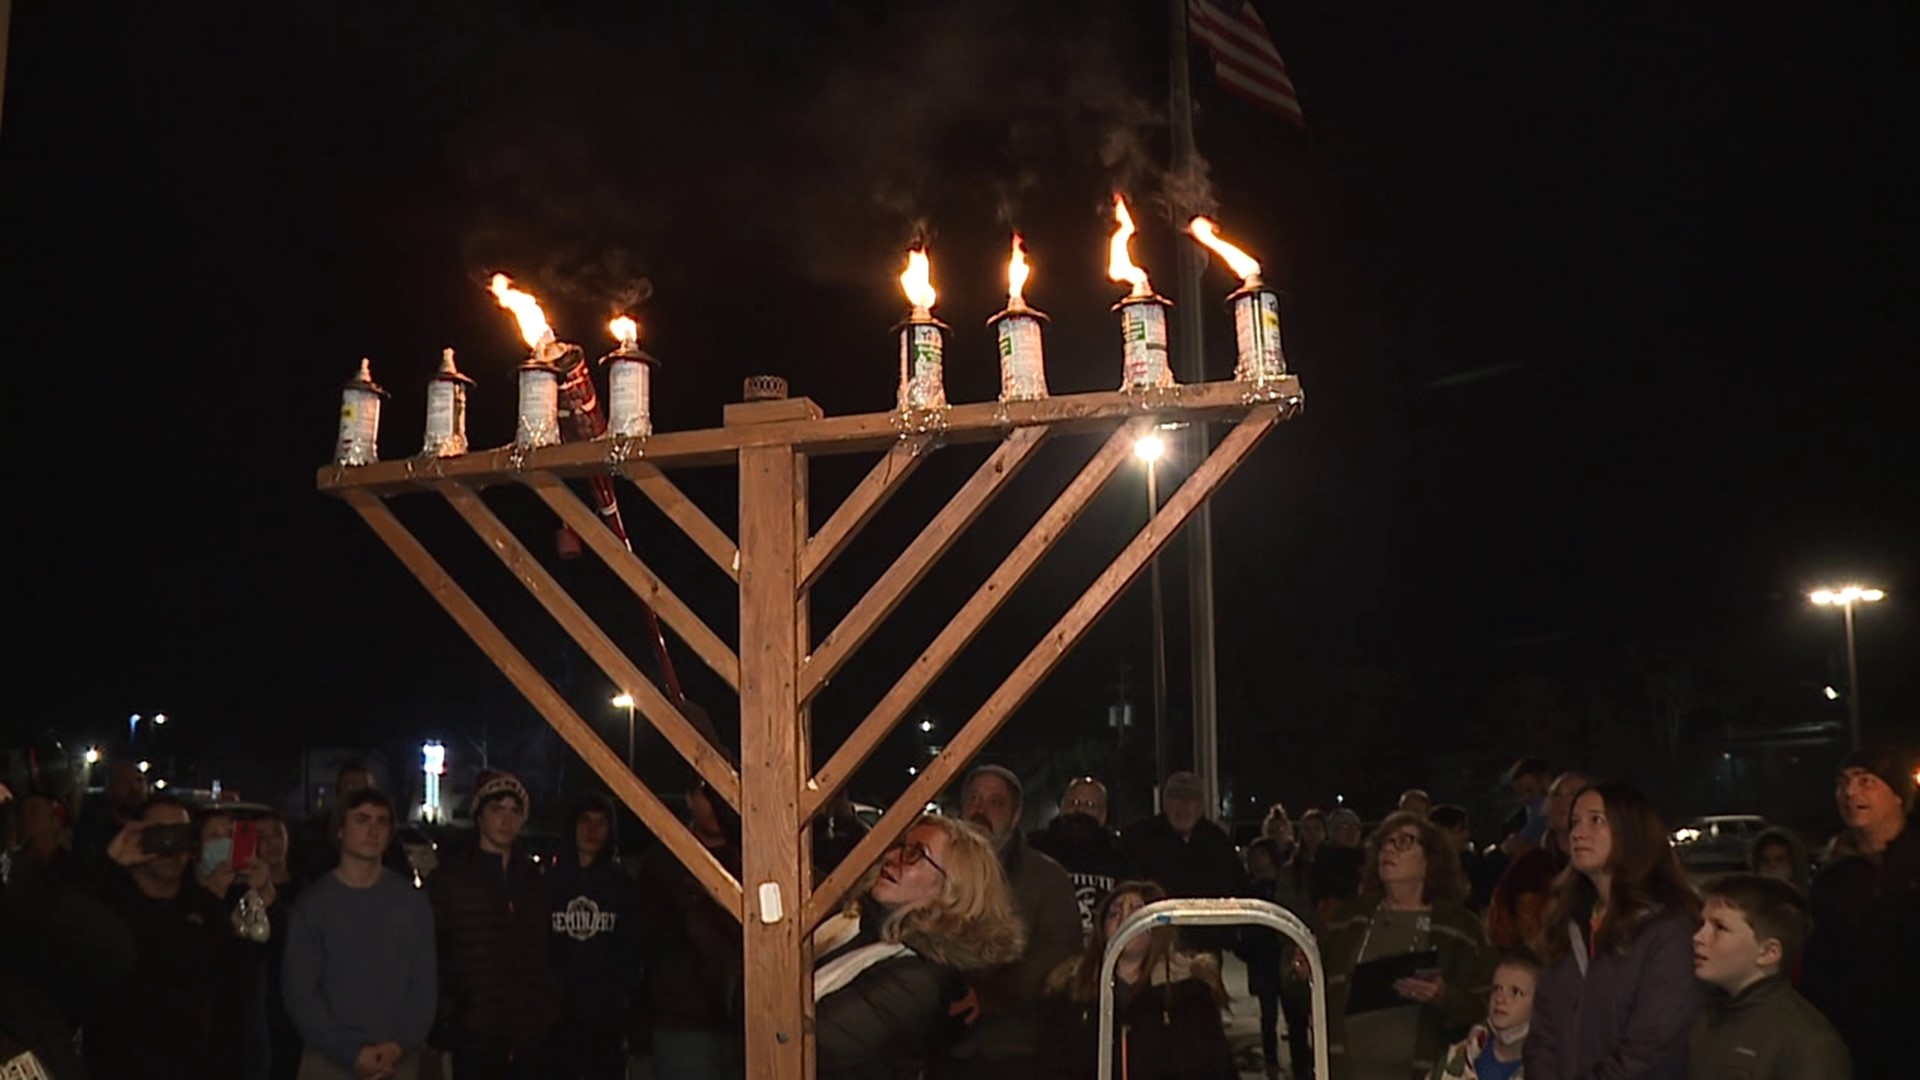 The festivities for the final night of Hanukkah began at 5 p.m. in Luzerne County.